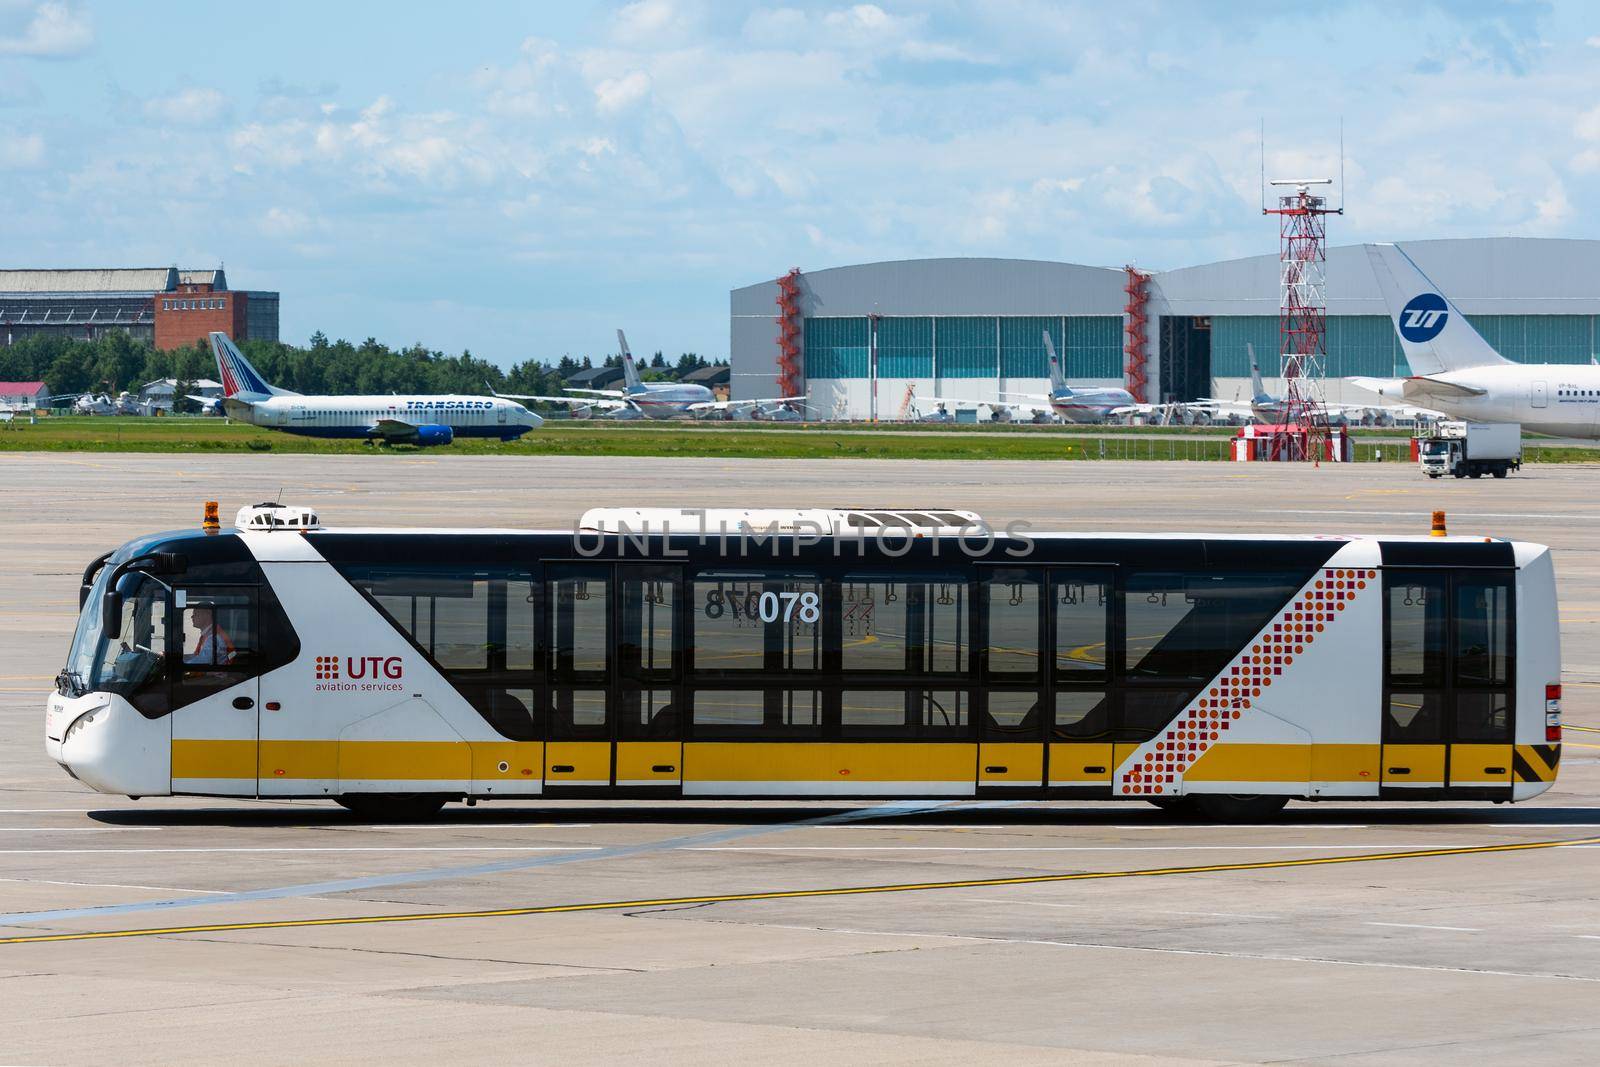 July 2, 2019 Moscow, Russia. Passenger bus at Vnukovo airport